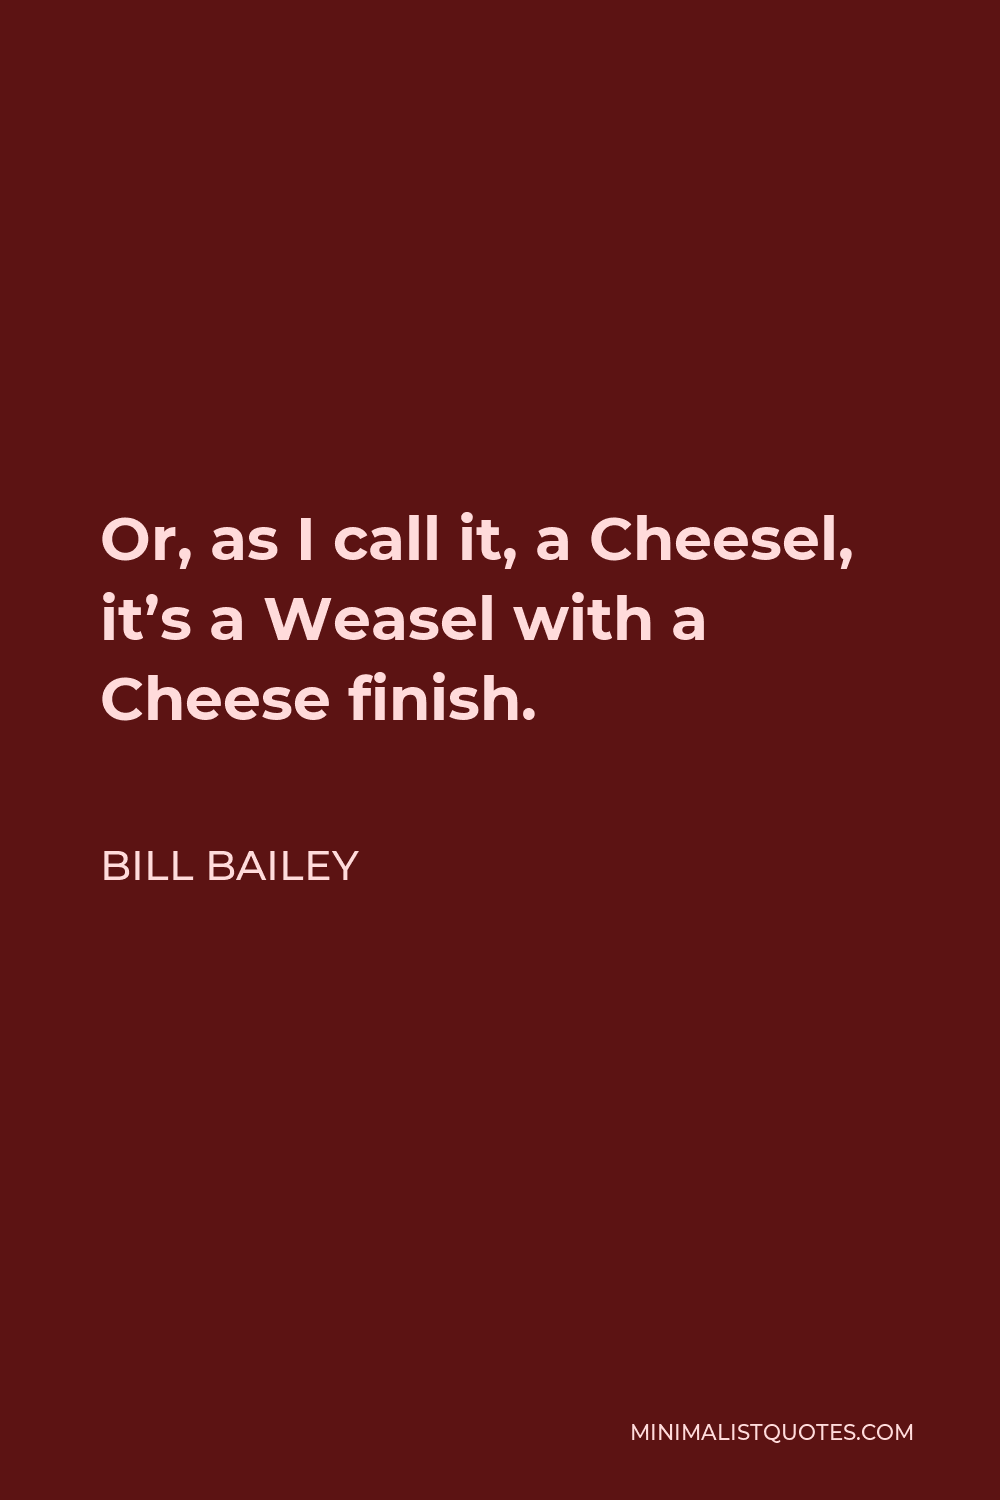 Bill Bailey Quote - Or, as I call it, a Cheesel, it’s a Weasel with a Cheese finish.